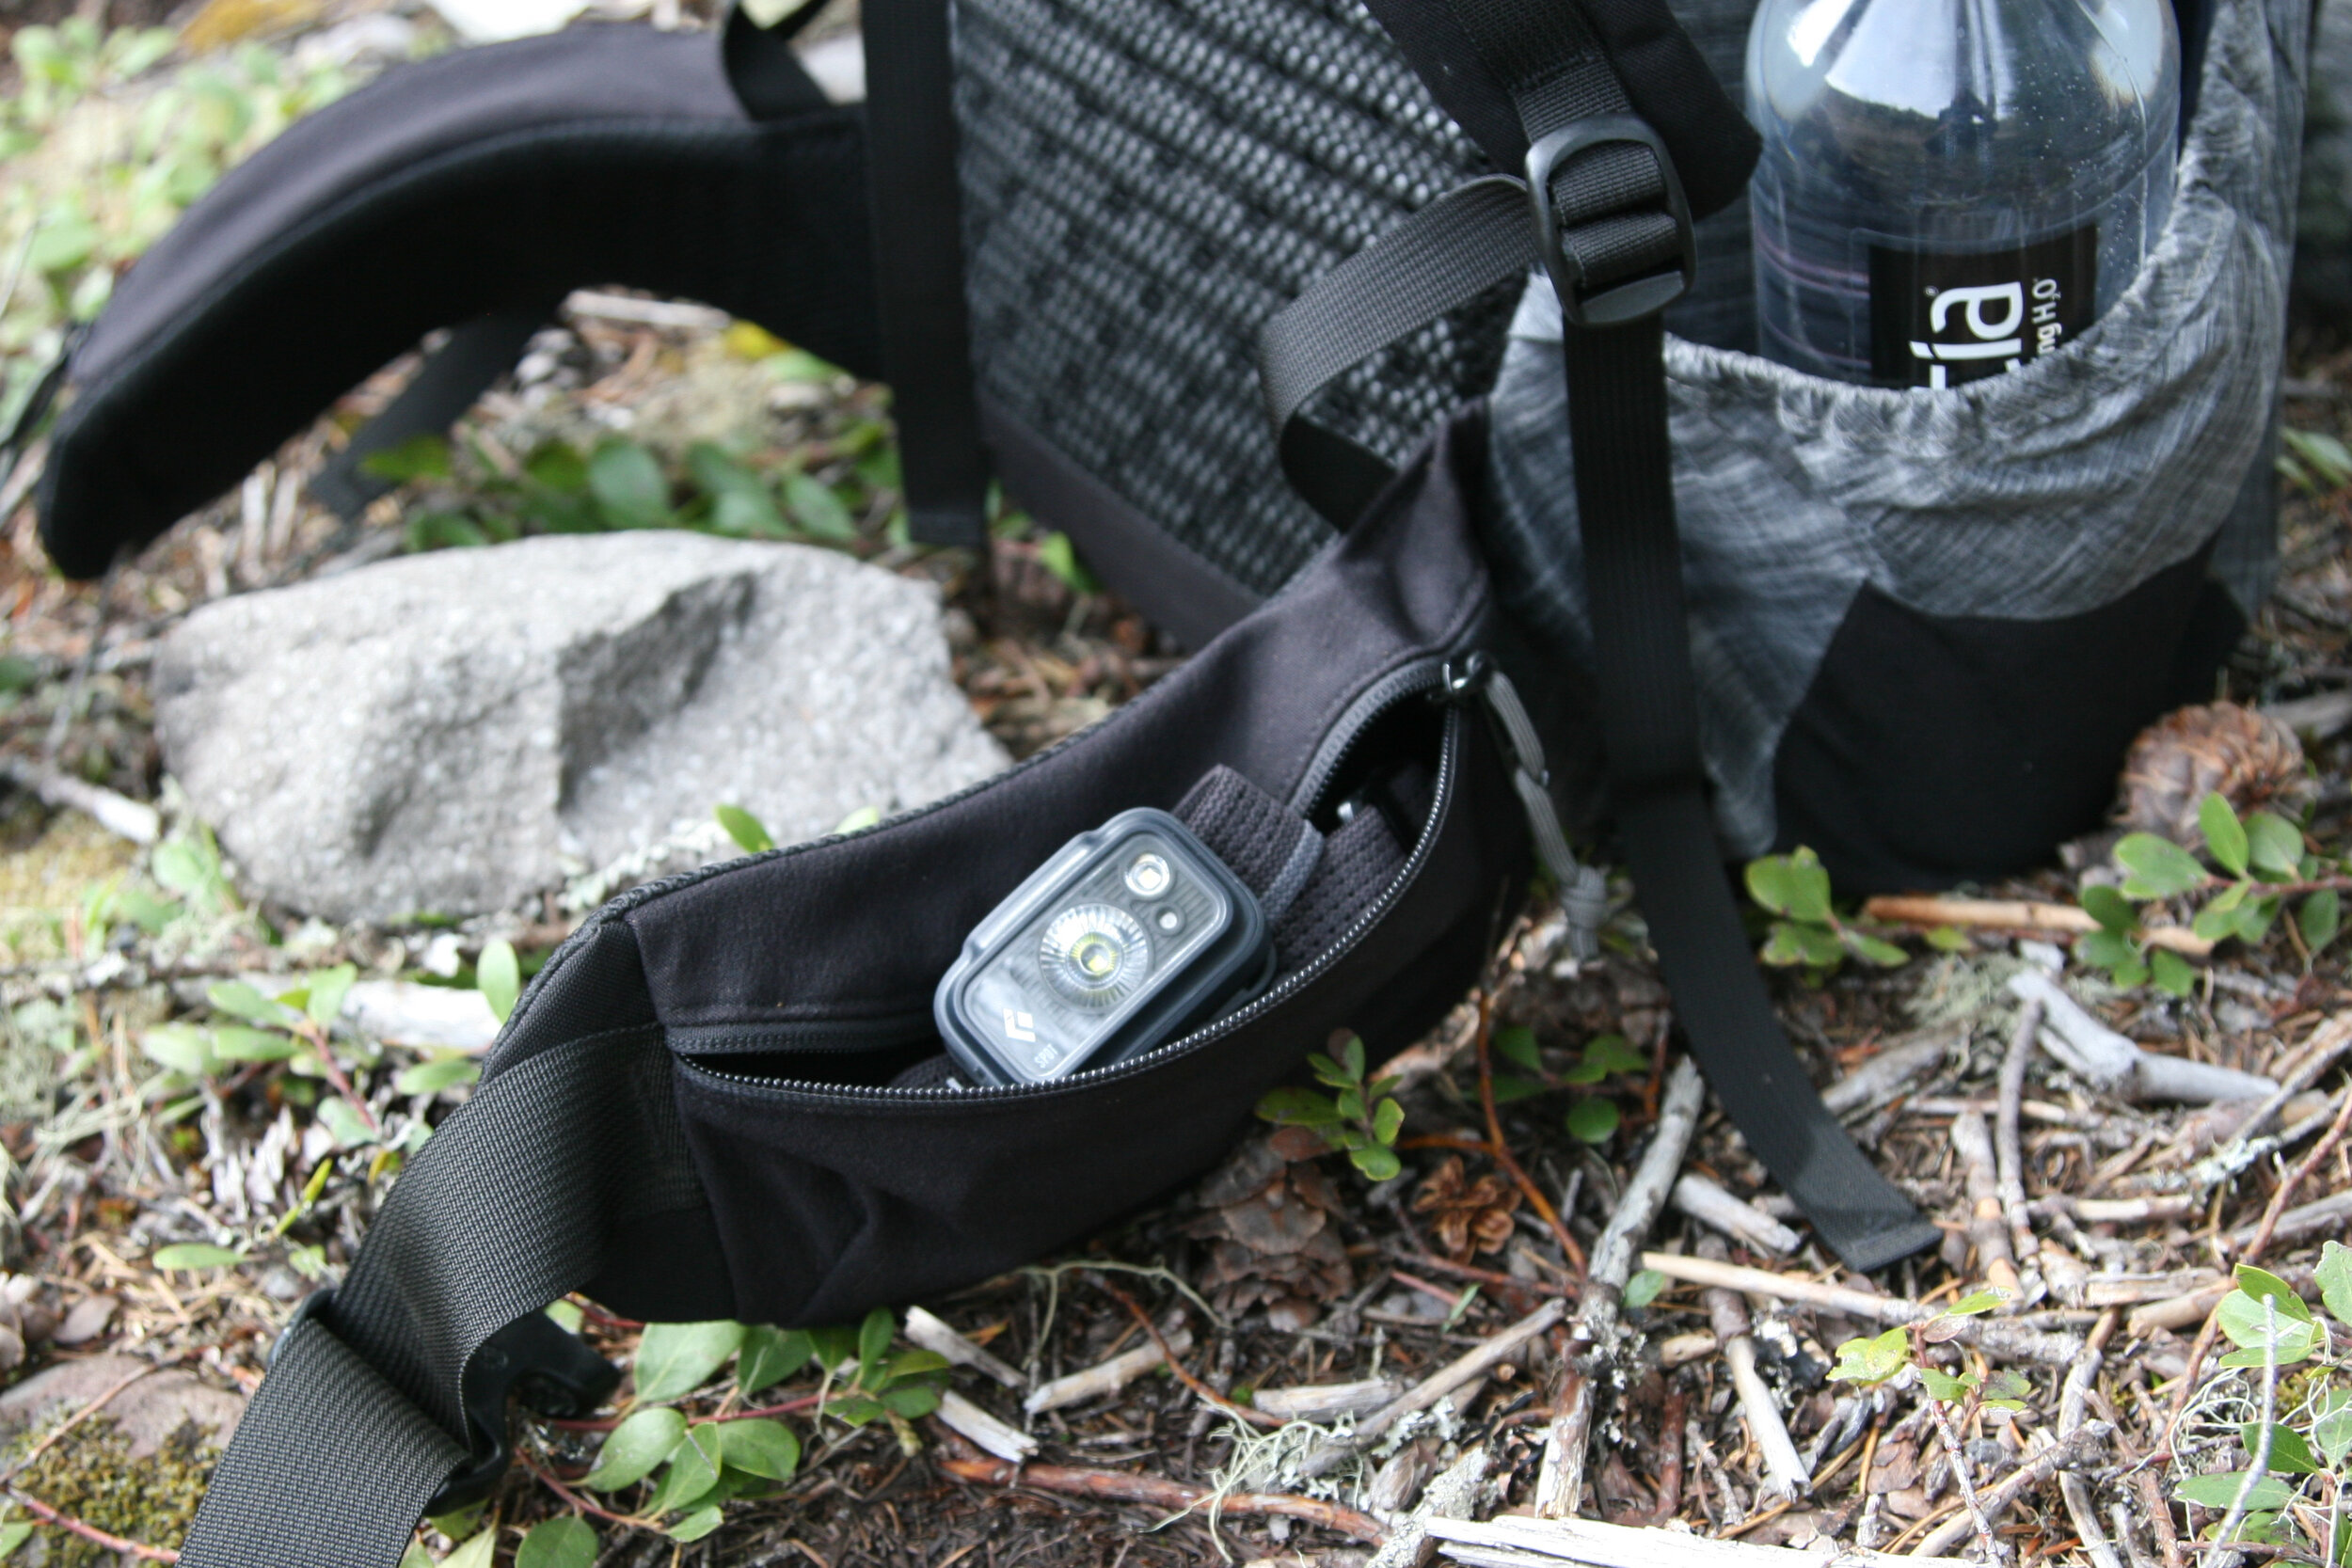 The Black Diamond Spot 325 is the headlamp we take on most of our long backpacking trips.